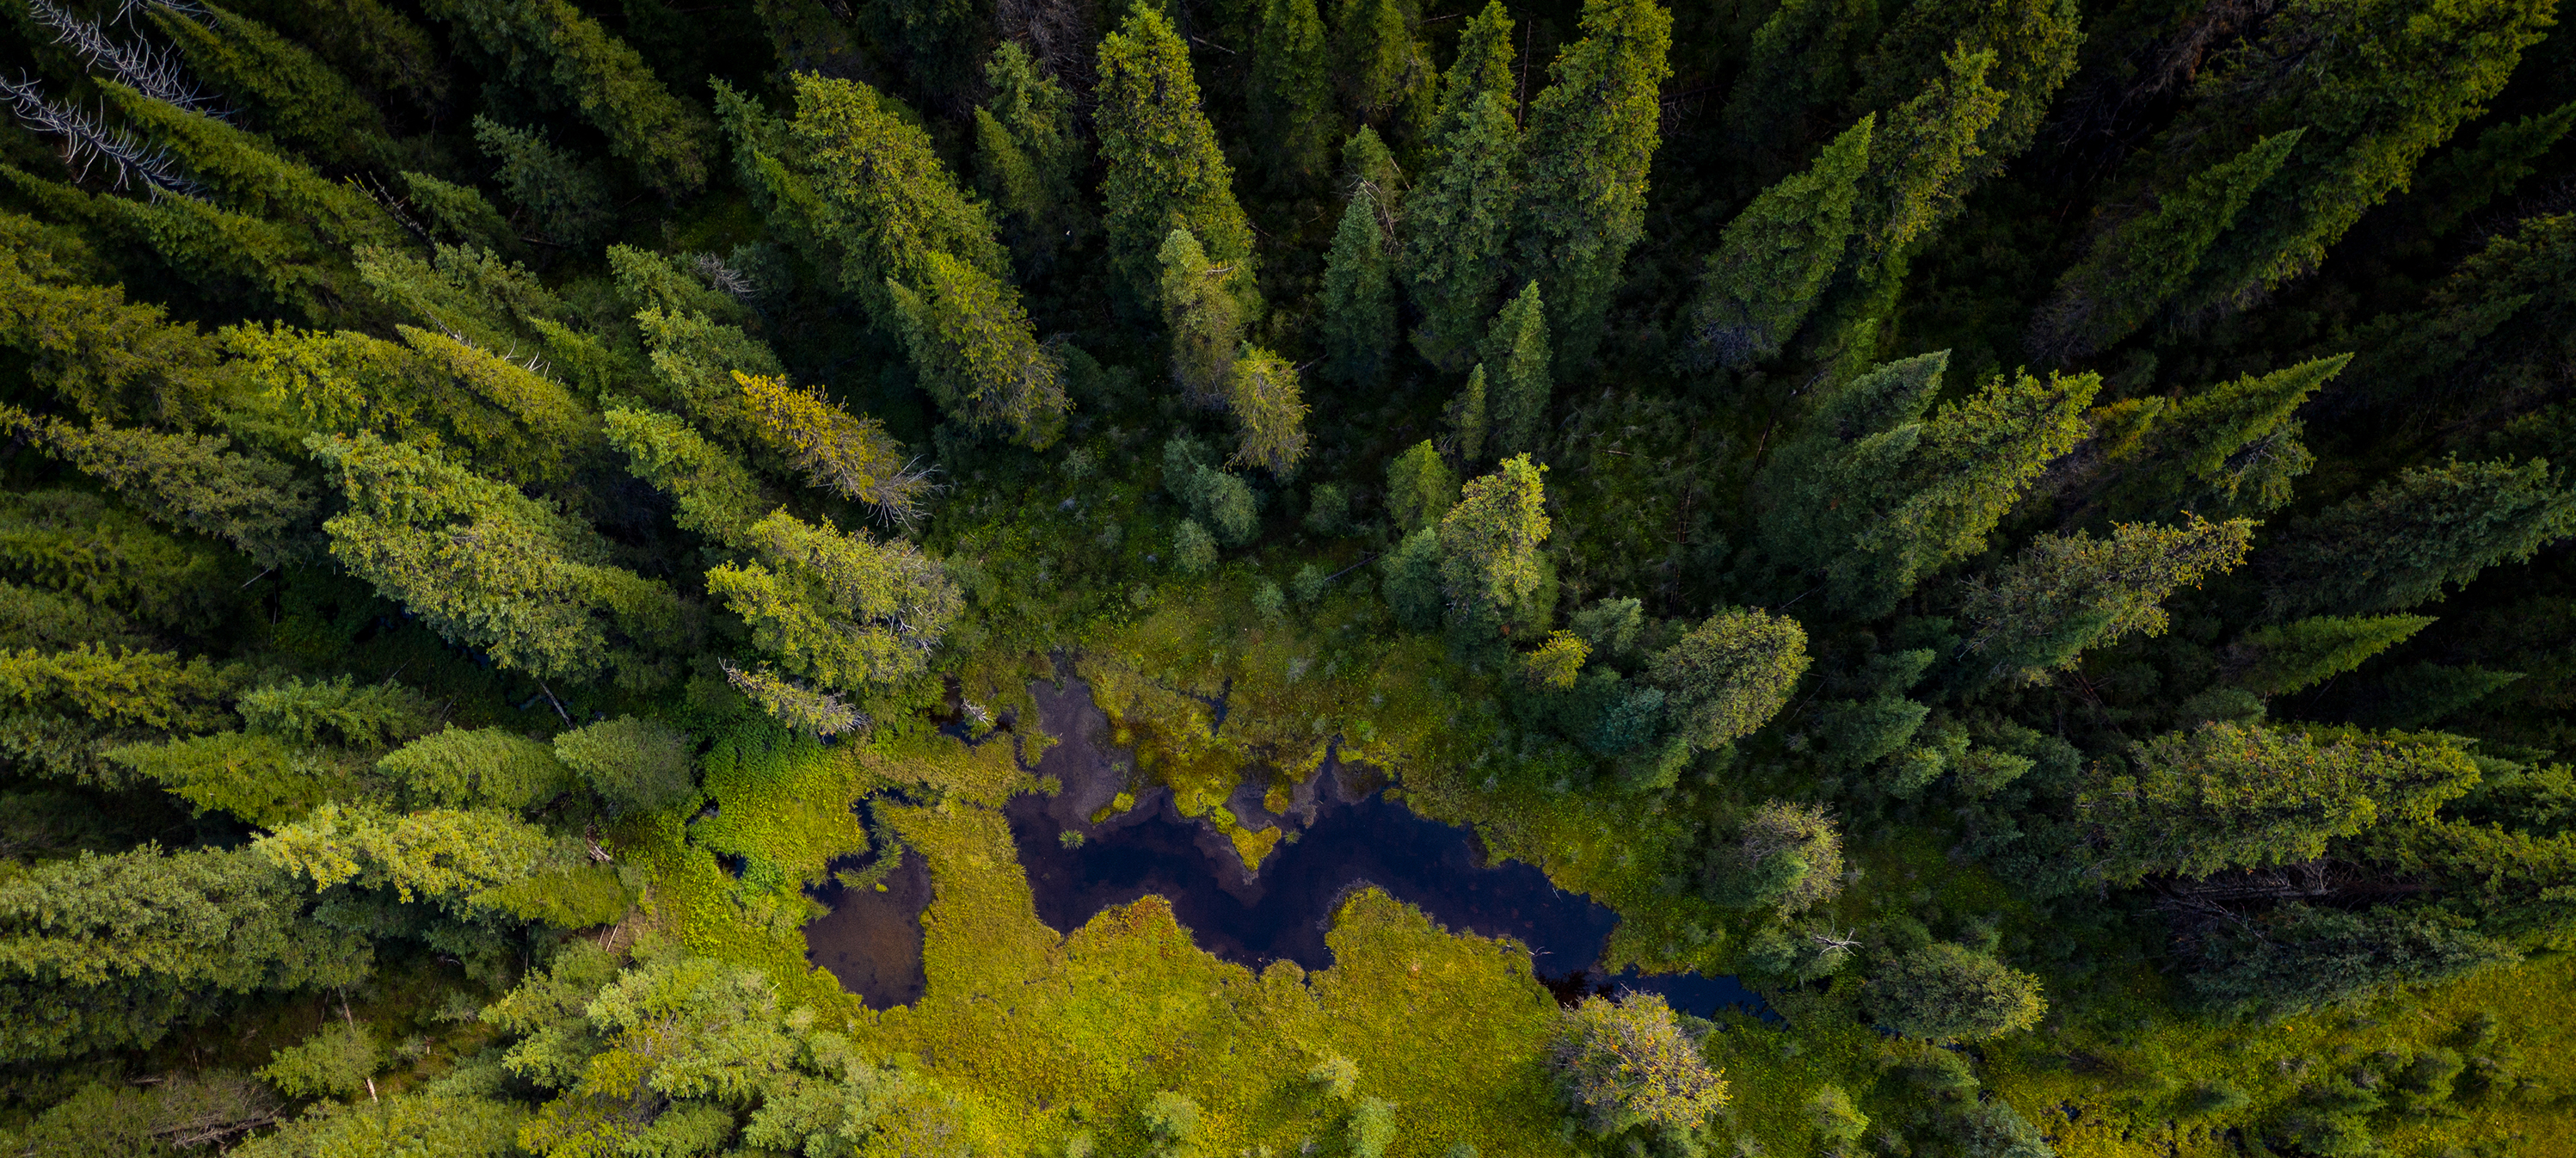 birds eye view of a forest